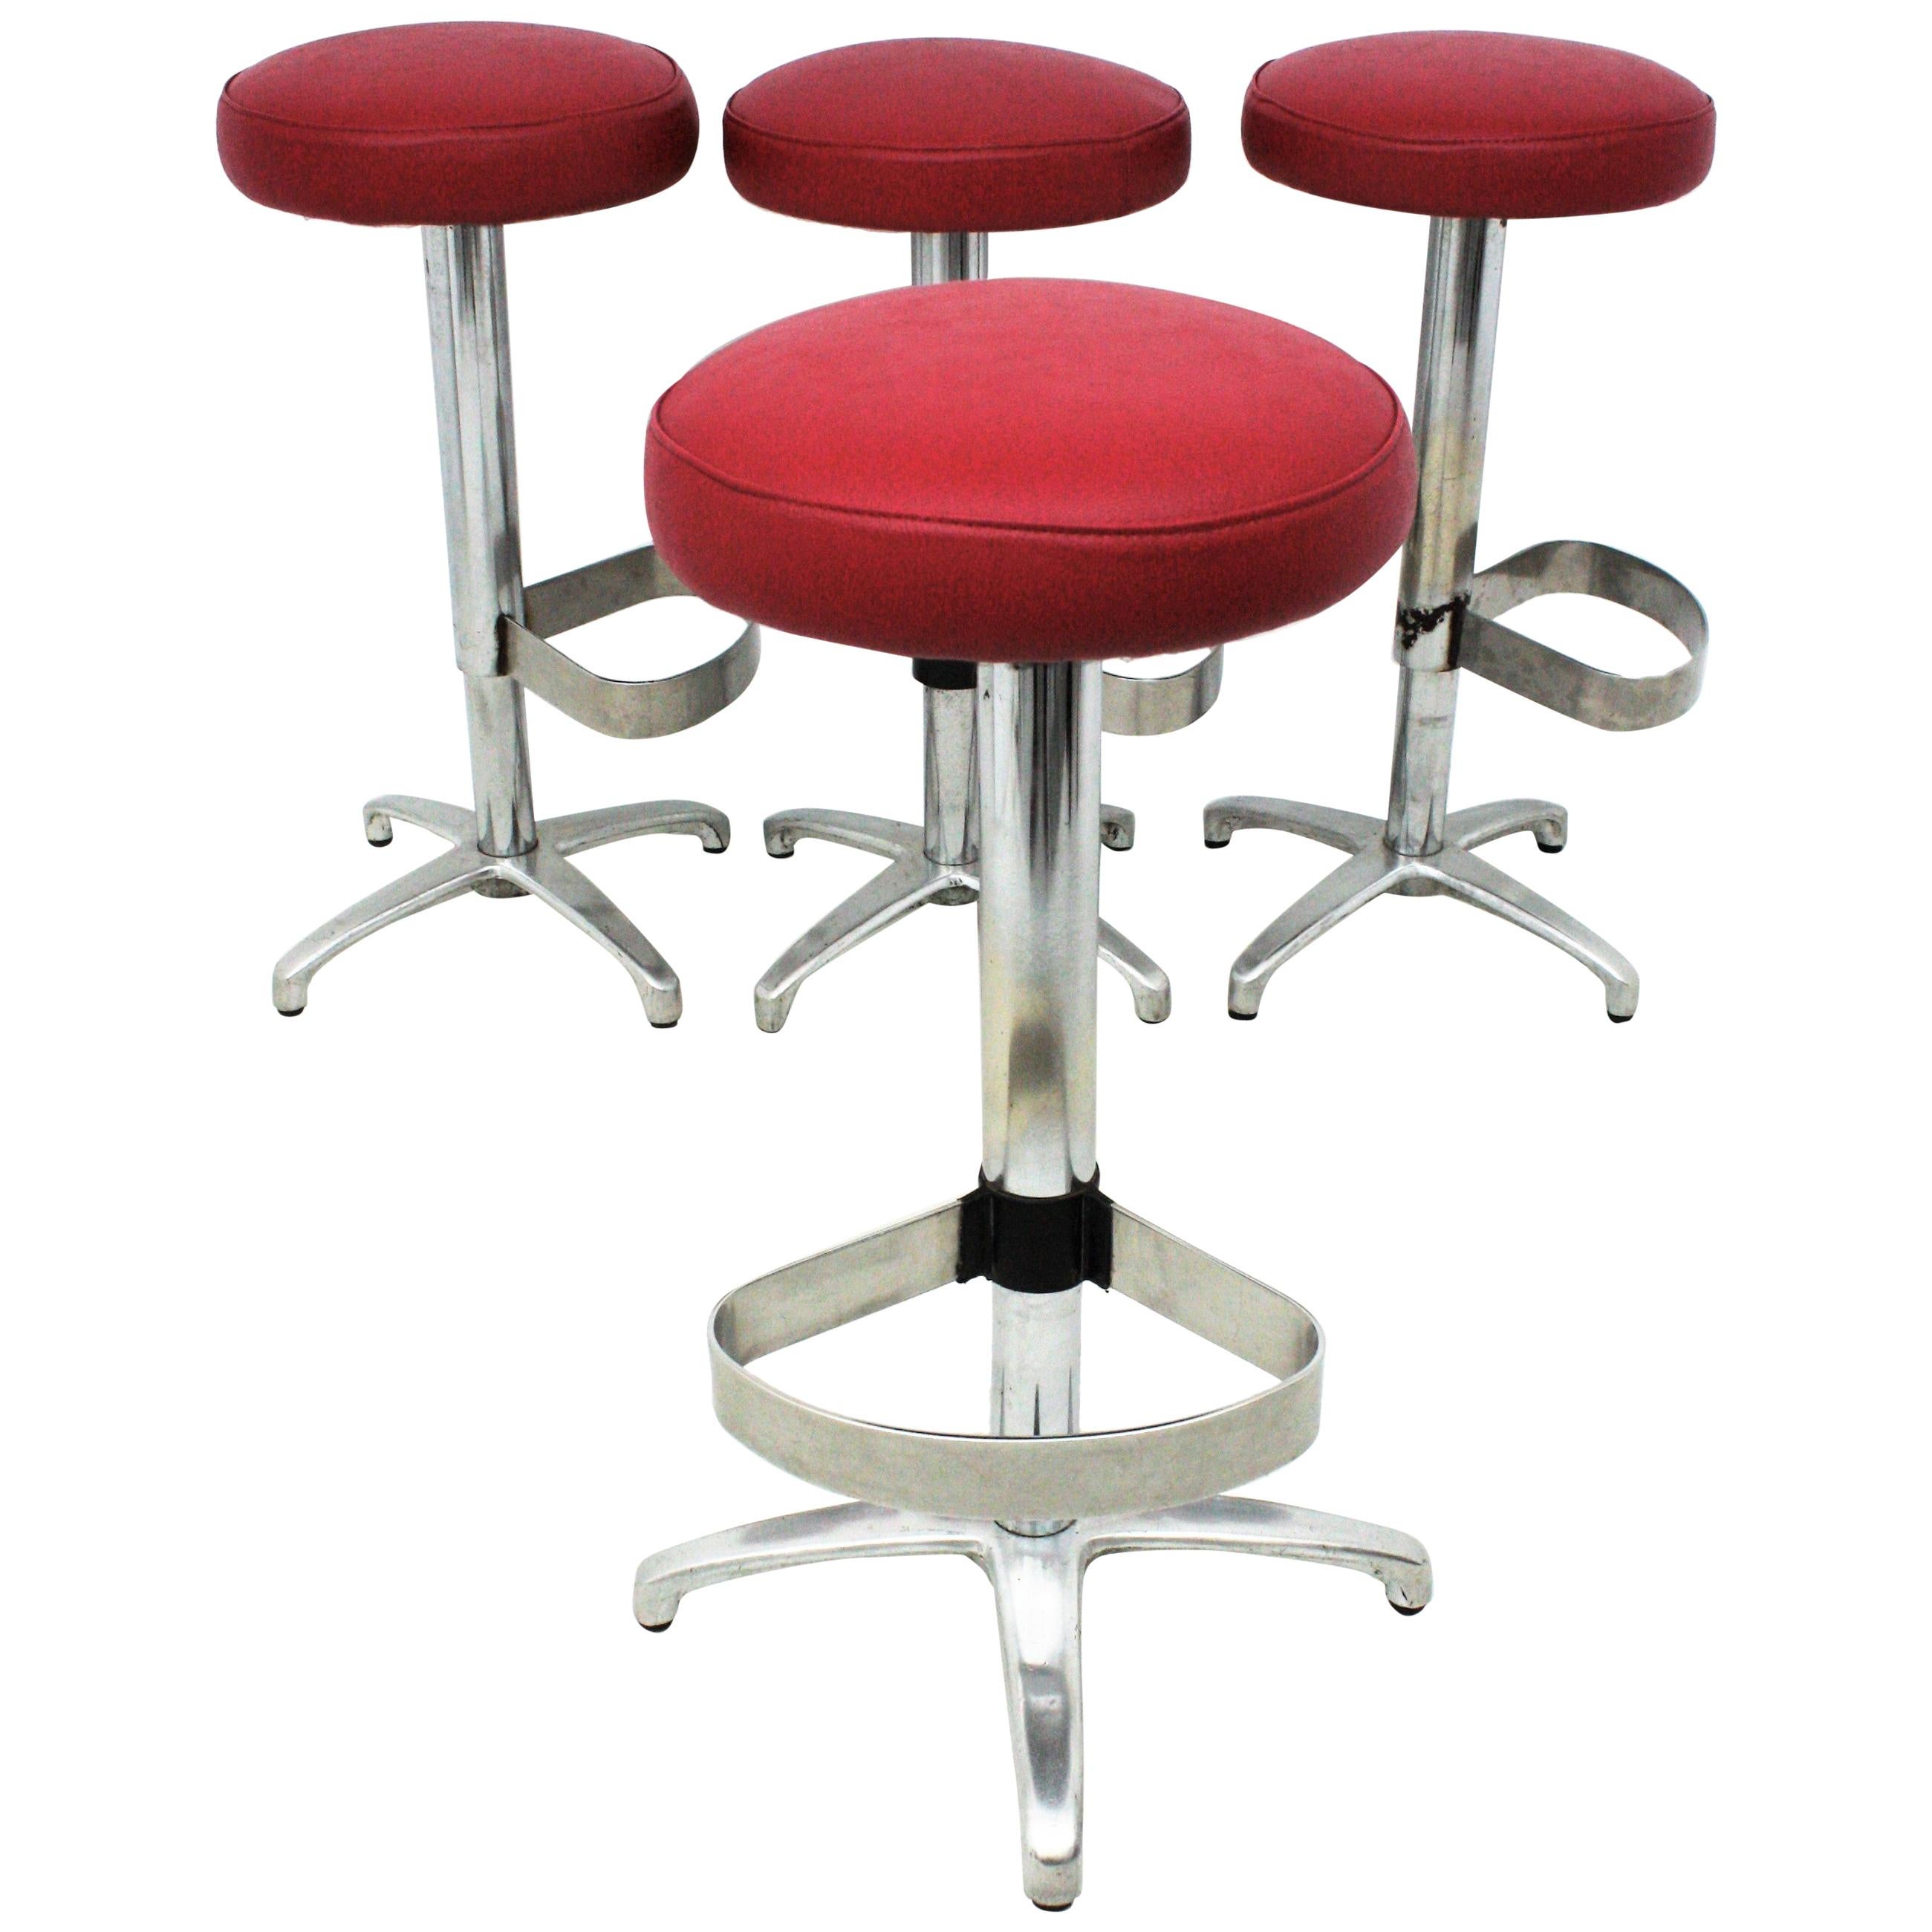 Set of Four Bar Stools in Red Leatherette and Metal